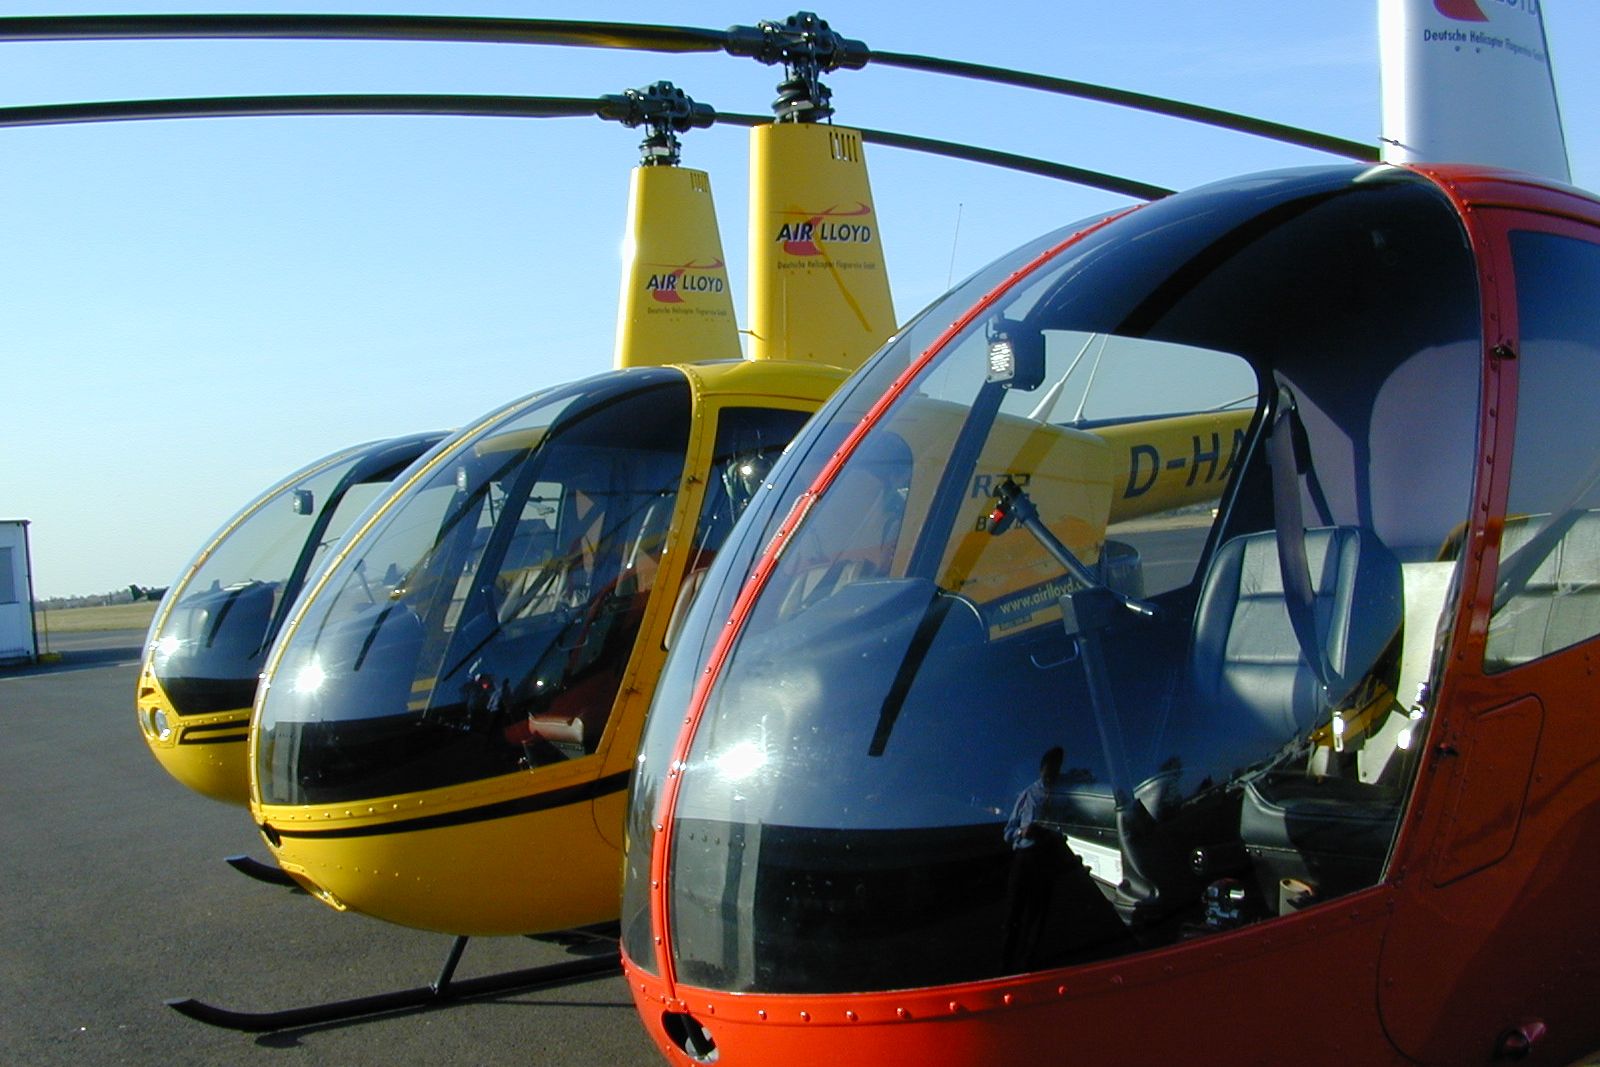 Two yellow and one red Air Lloyd helicopters